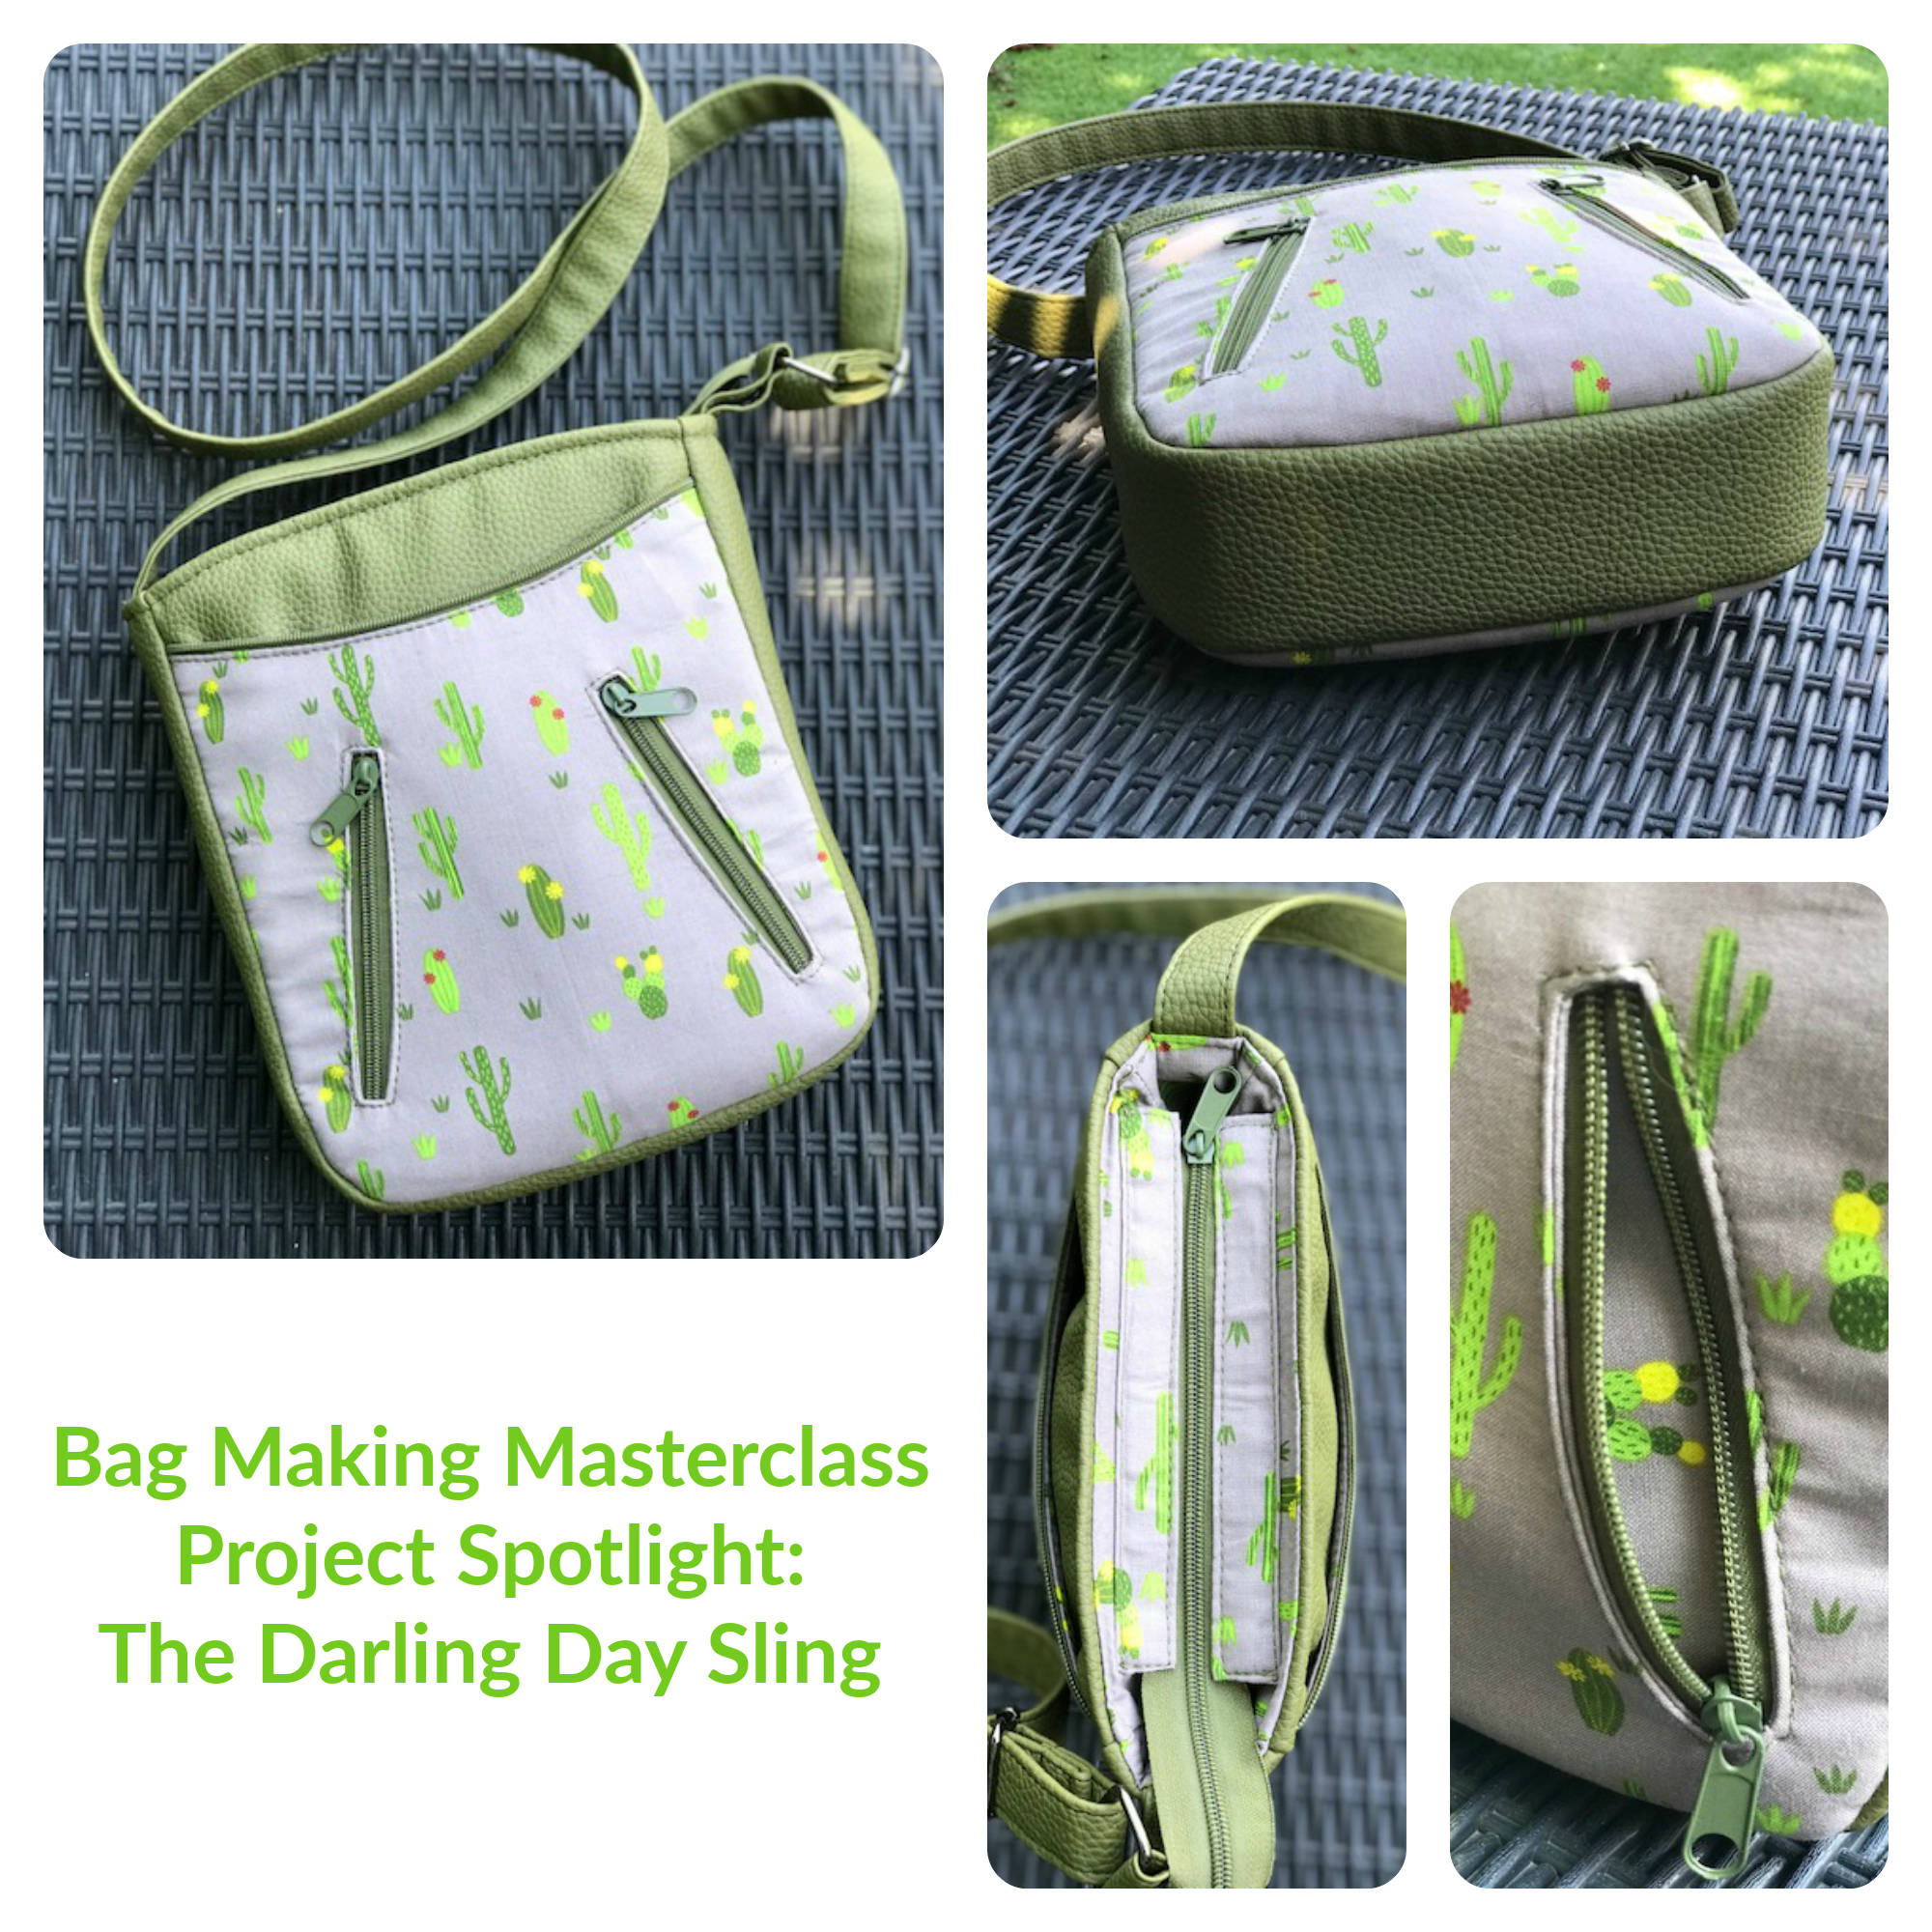 The Darling Day Sling from The Complete Bag Making Masterclass